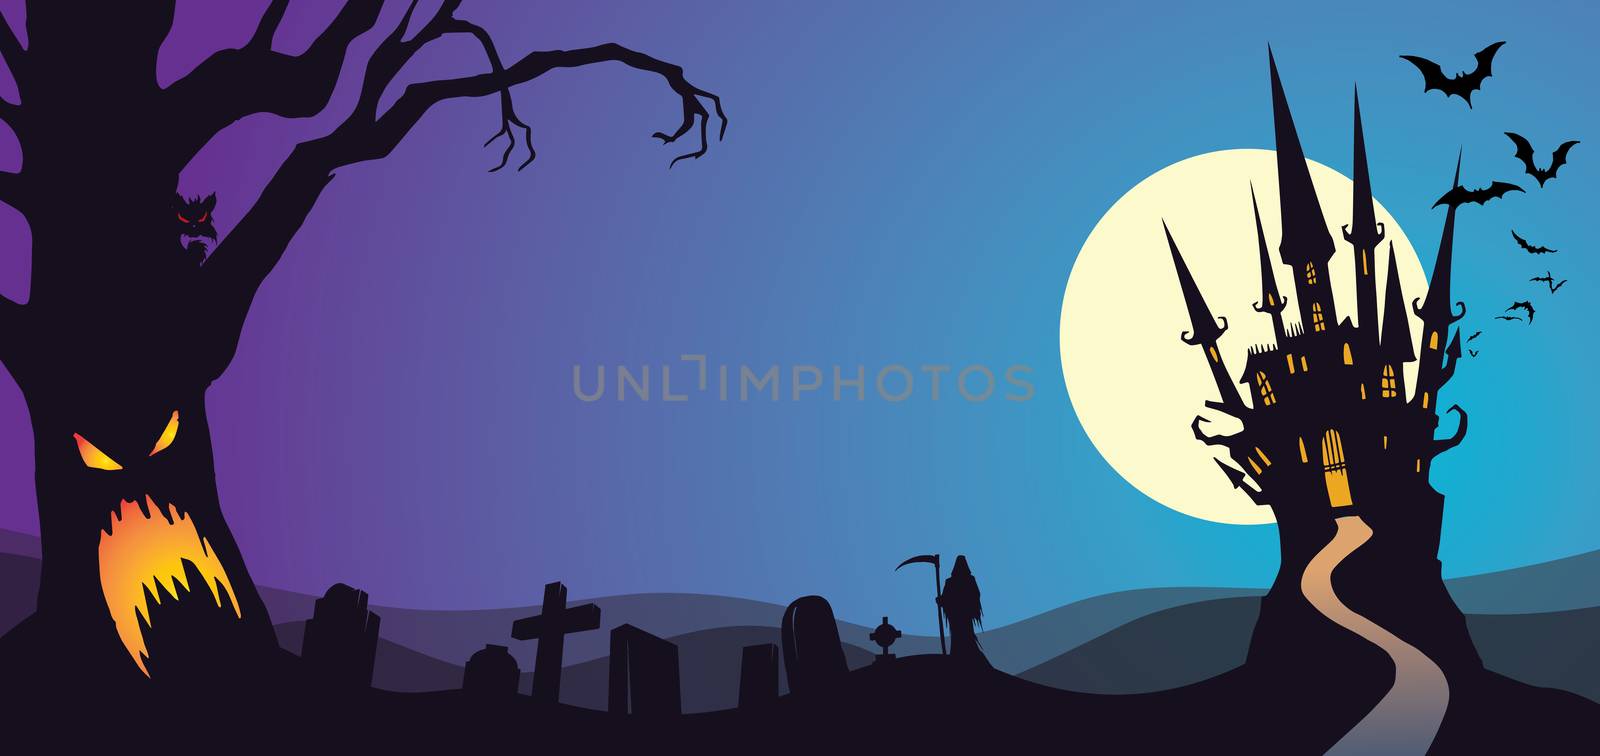 Halloween haunted graveyard castle and tree face with bats in night sky